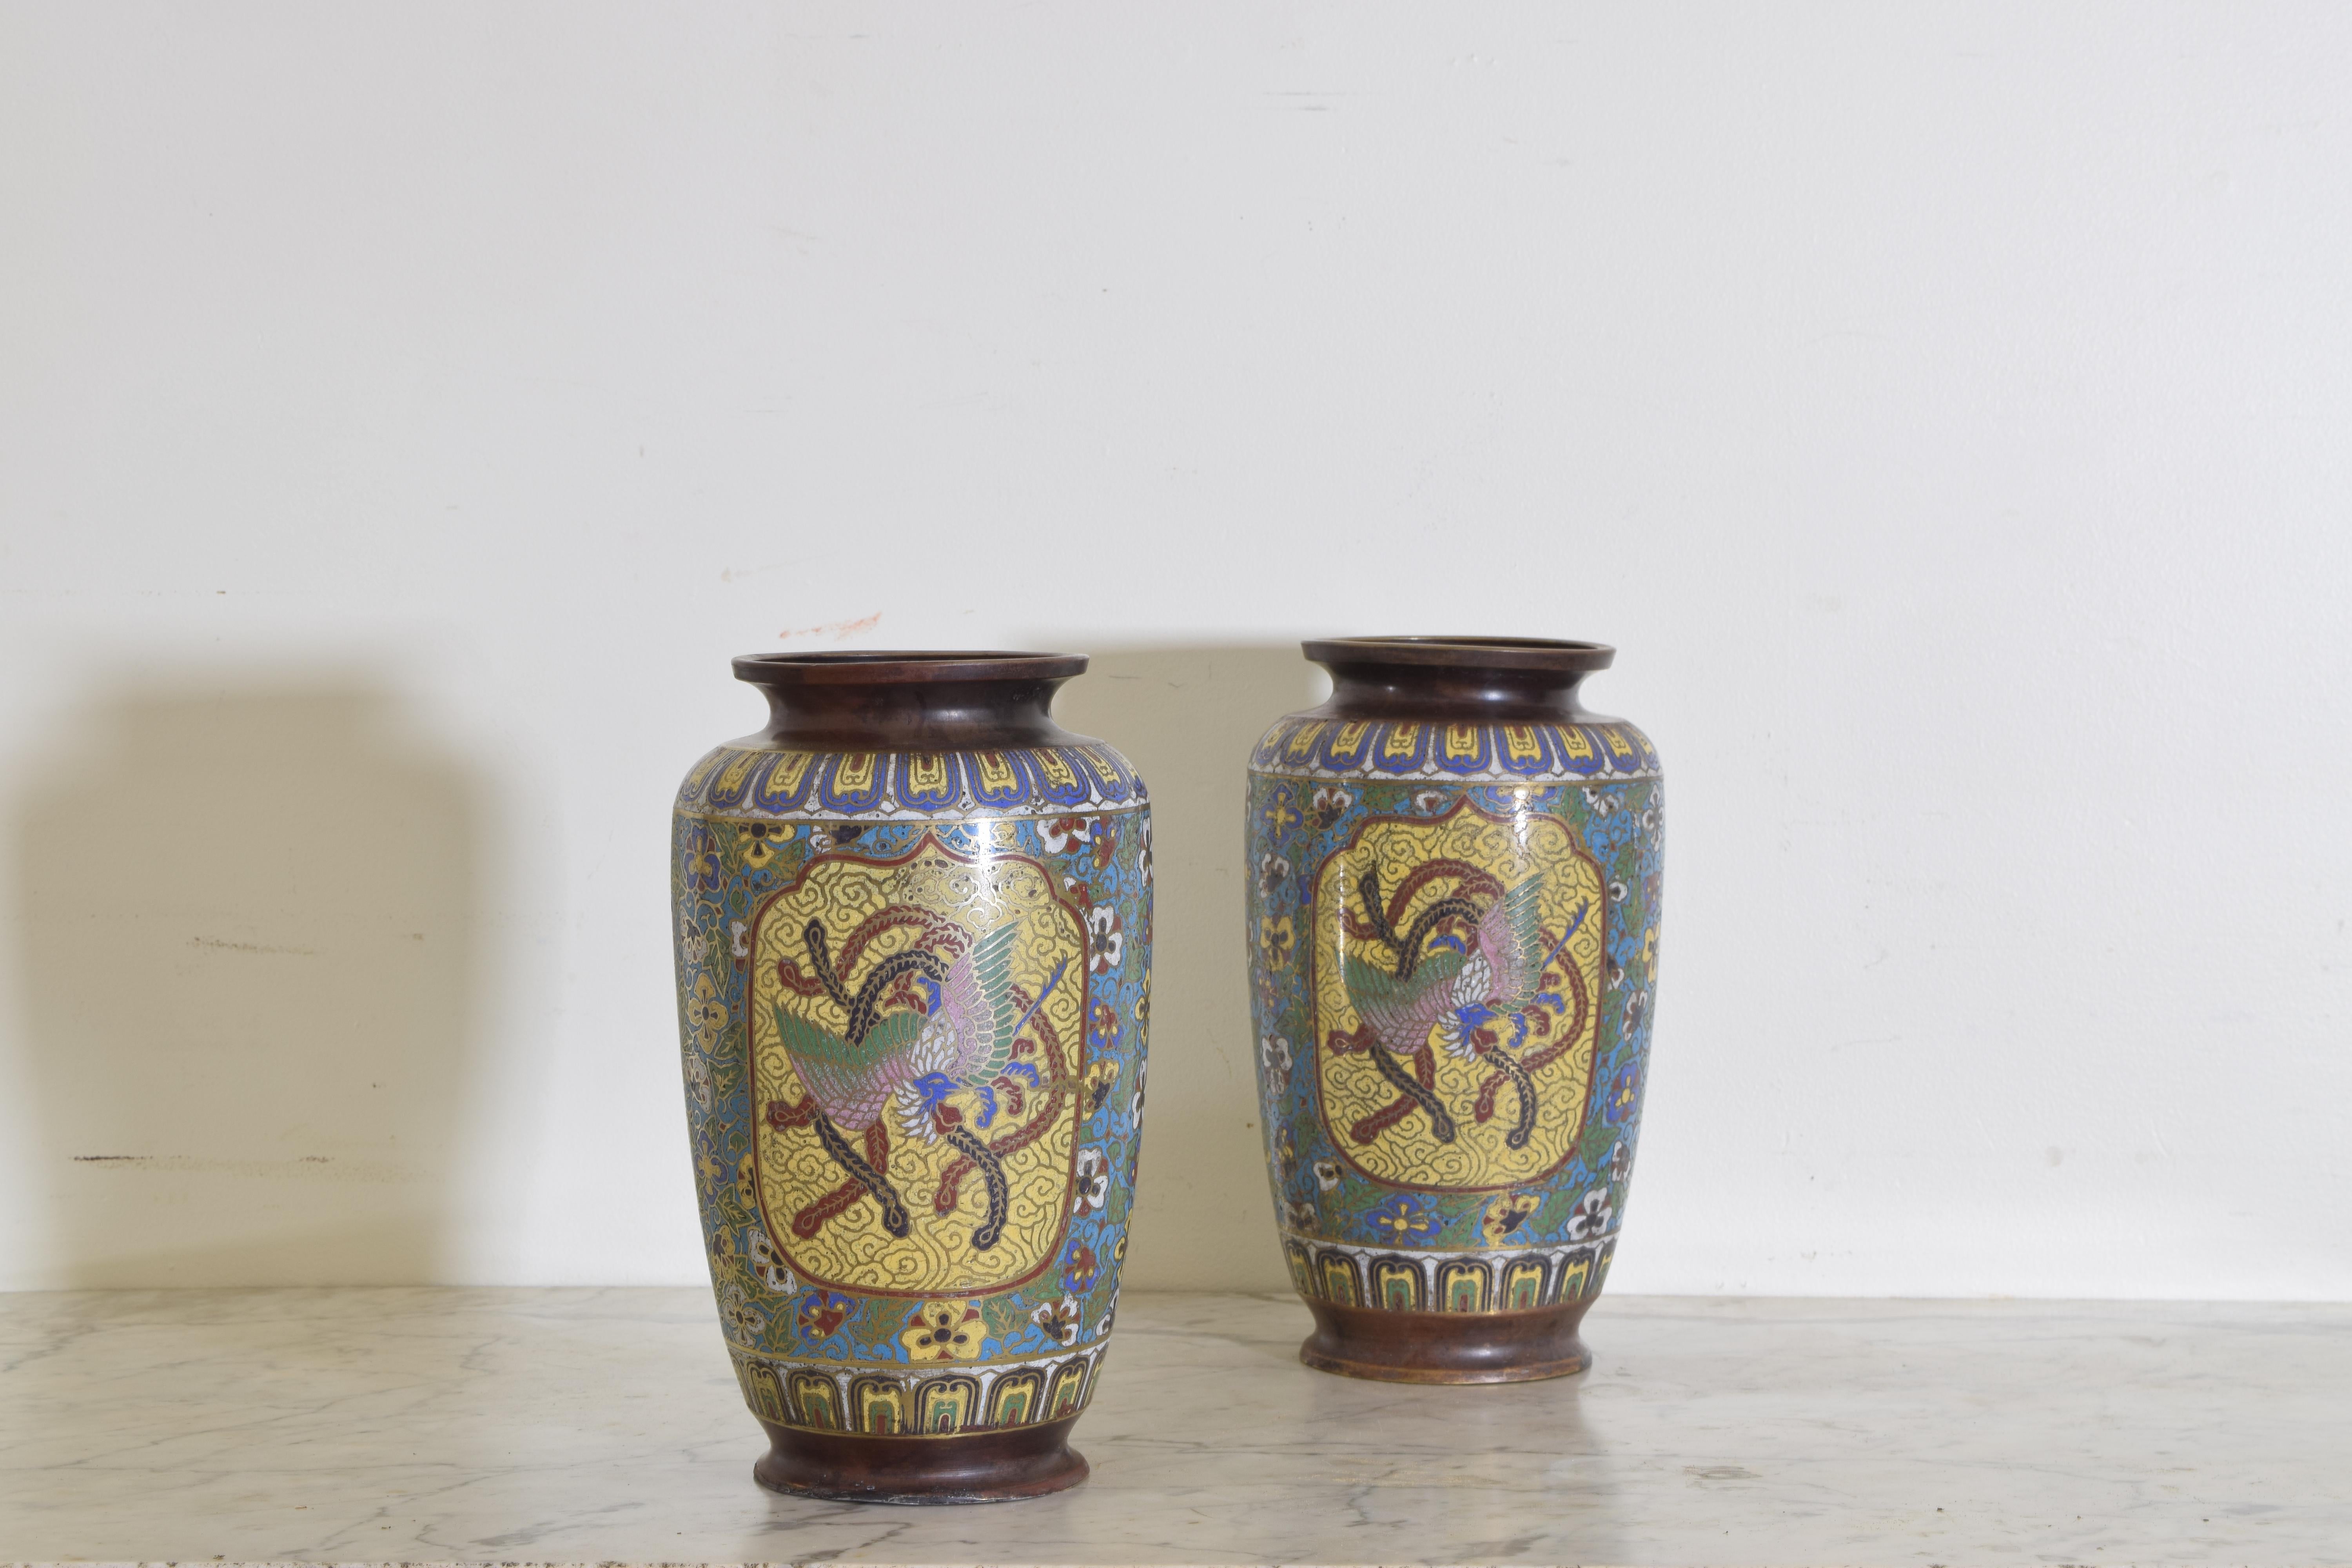 Japanese Pair of Cloisonné Multicolored Vases with Birds, Flowers, and Serpents